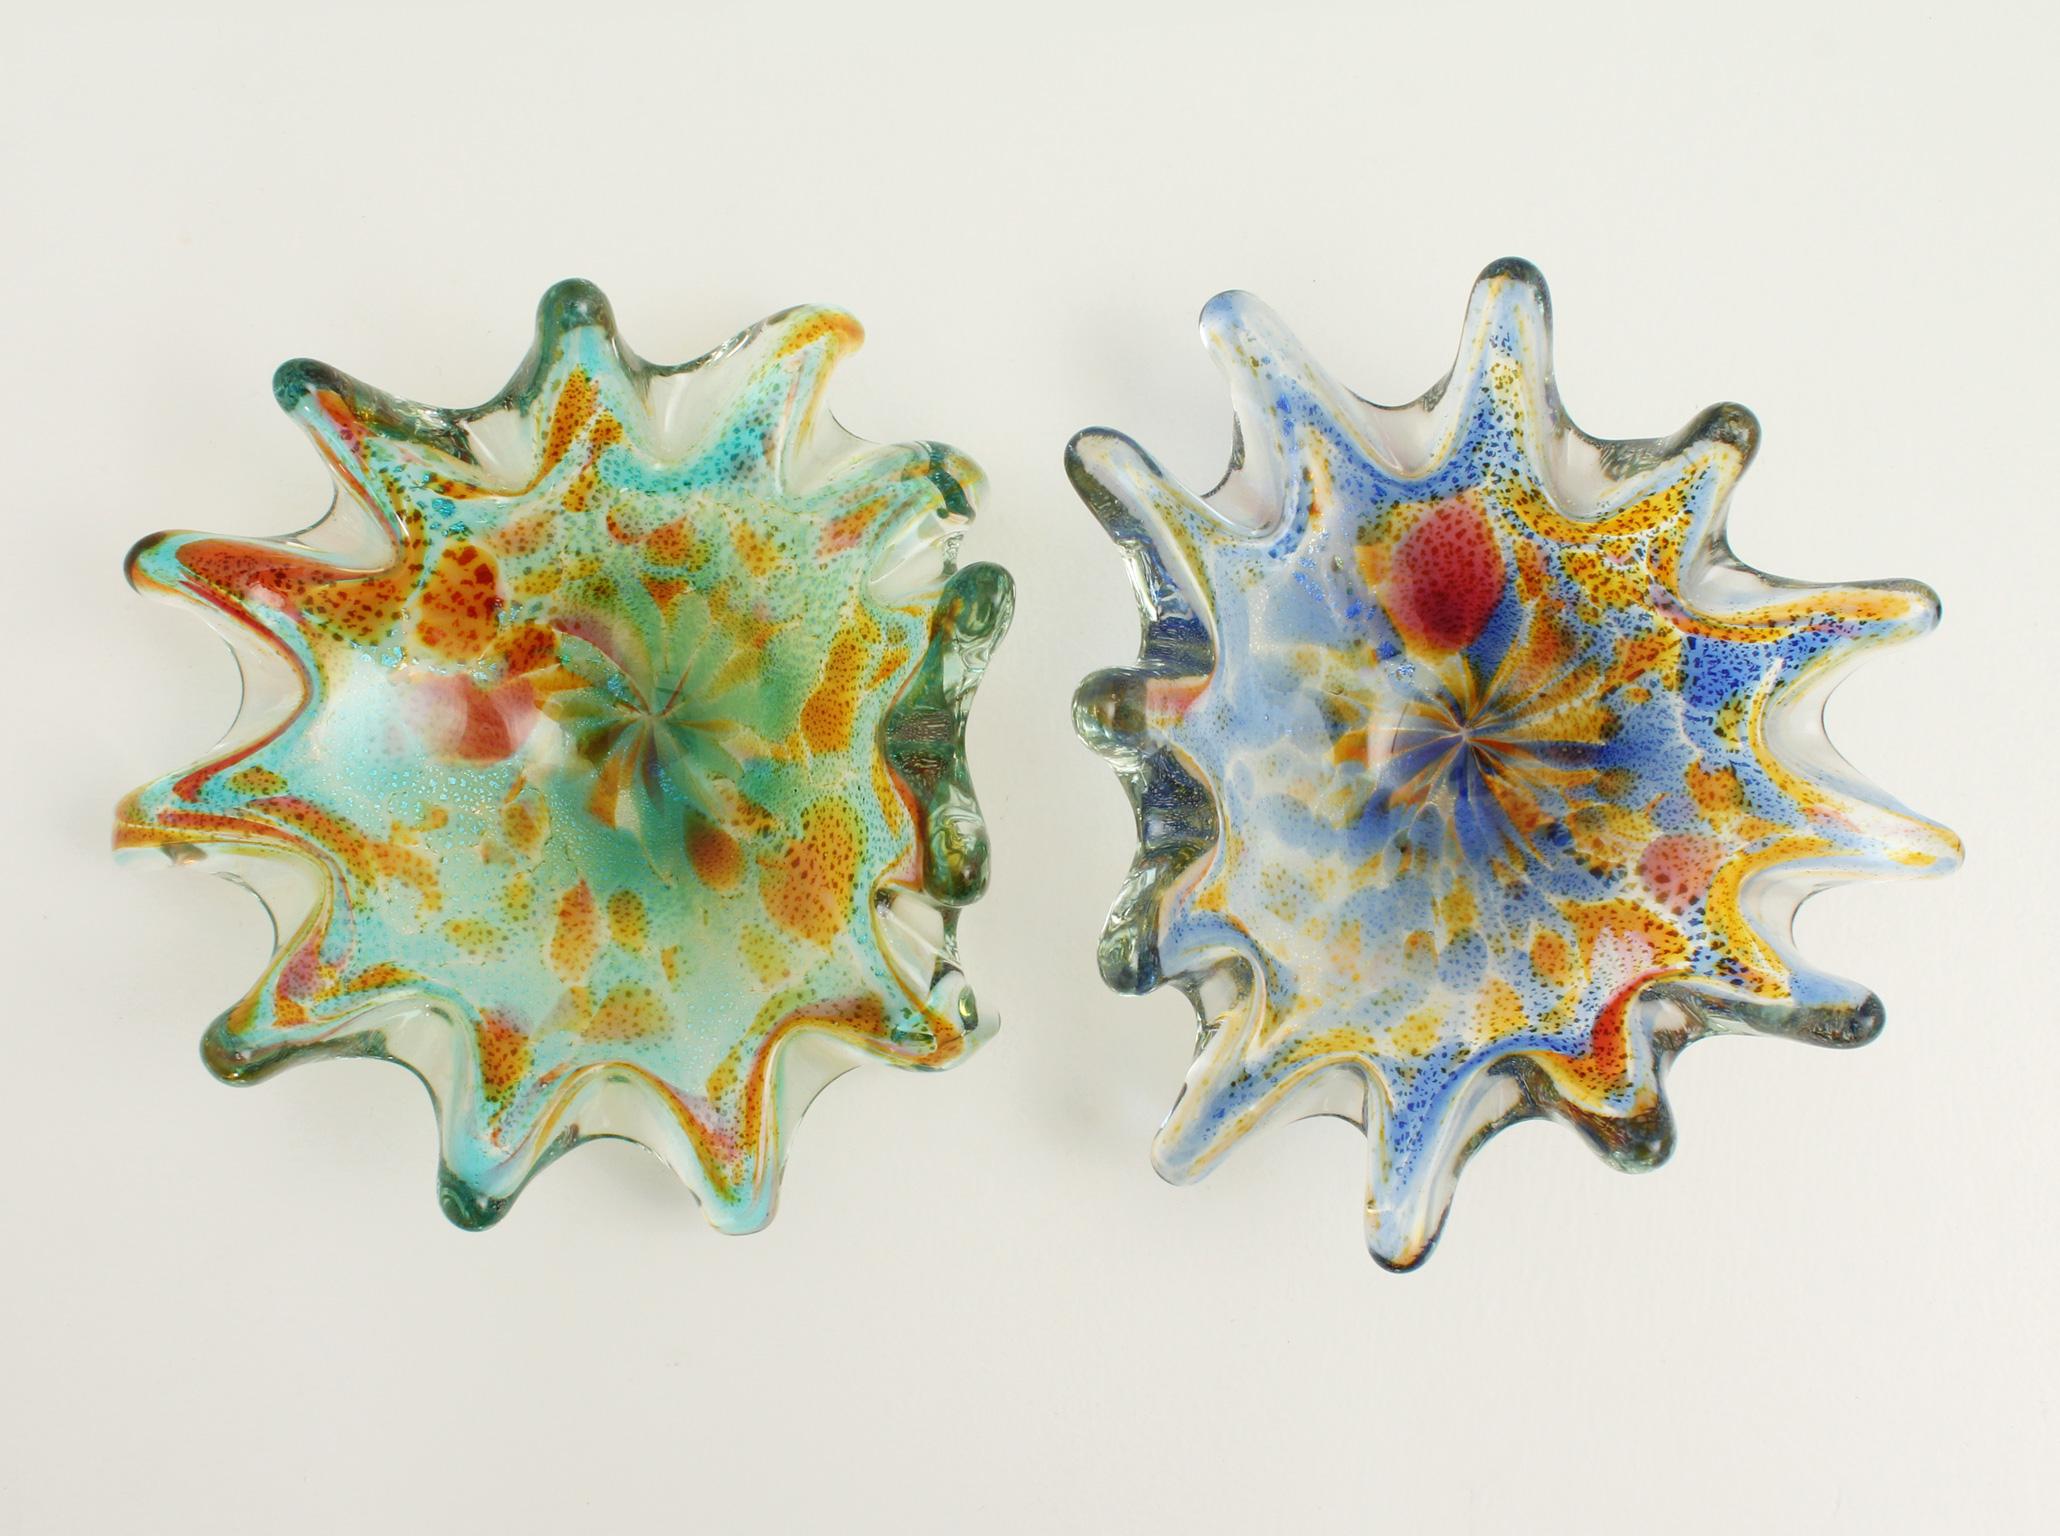 Pair of freeform Murano colored ashtrays or bowls from 1960's, Italy. Multicolored Murano art glass with silver flecks inclusions. 